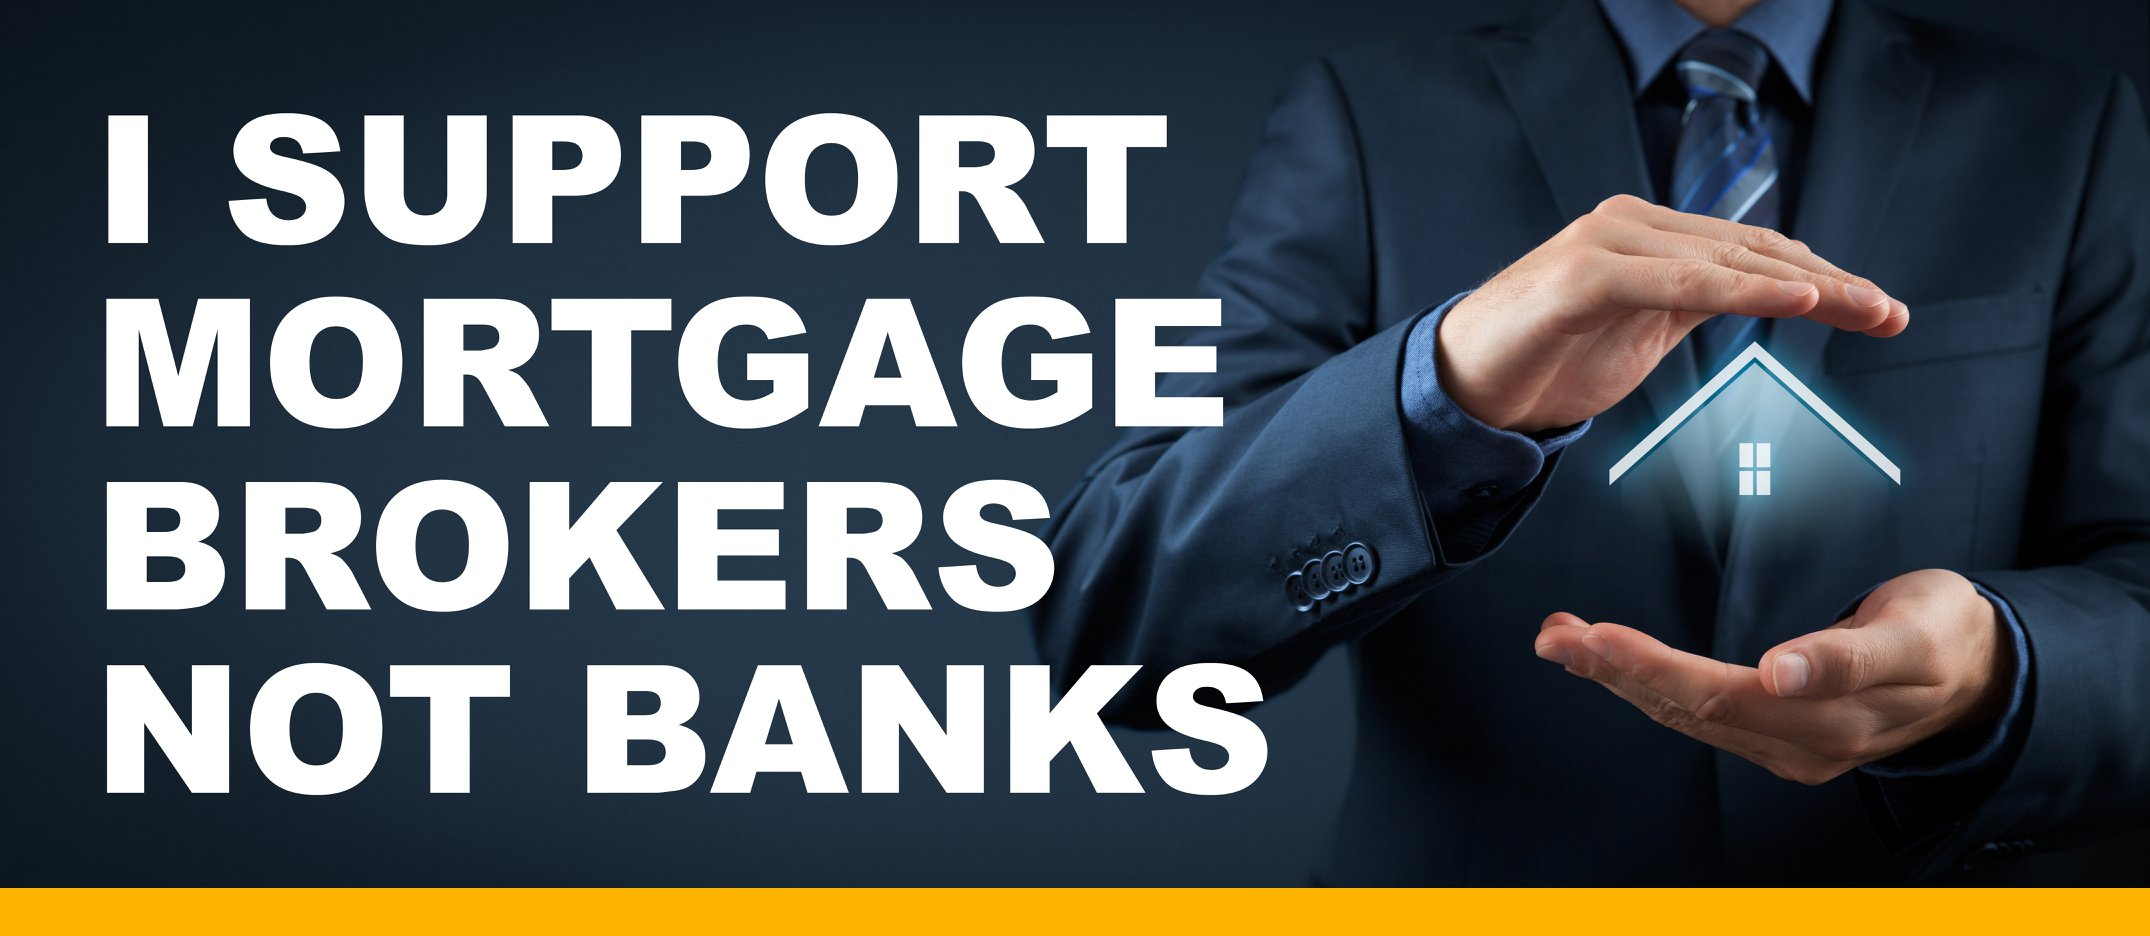 Mortgage Broker Fee Agreement We Support Mortgage Brokers Not Banks Onenationau